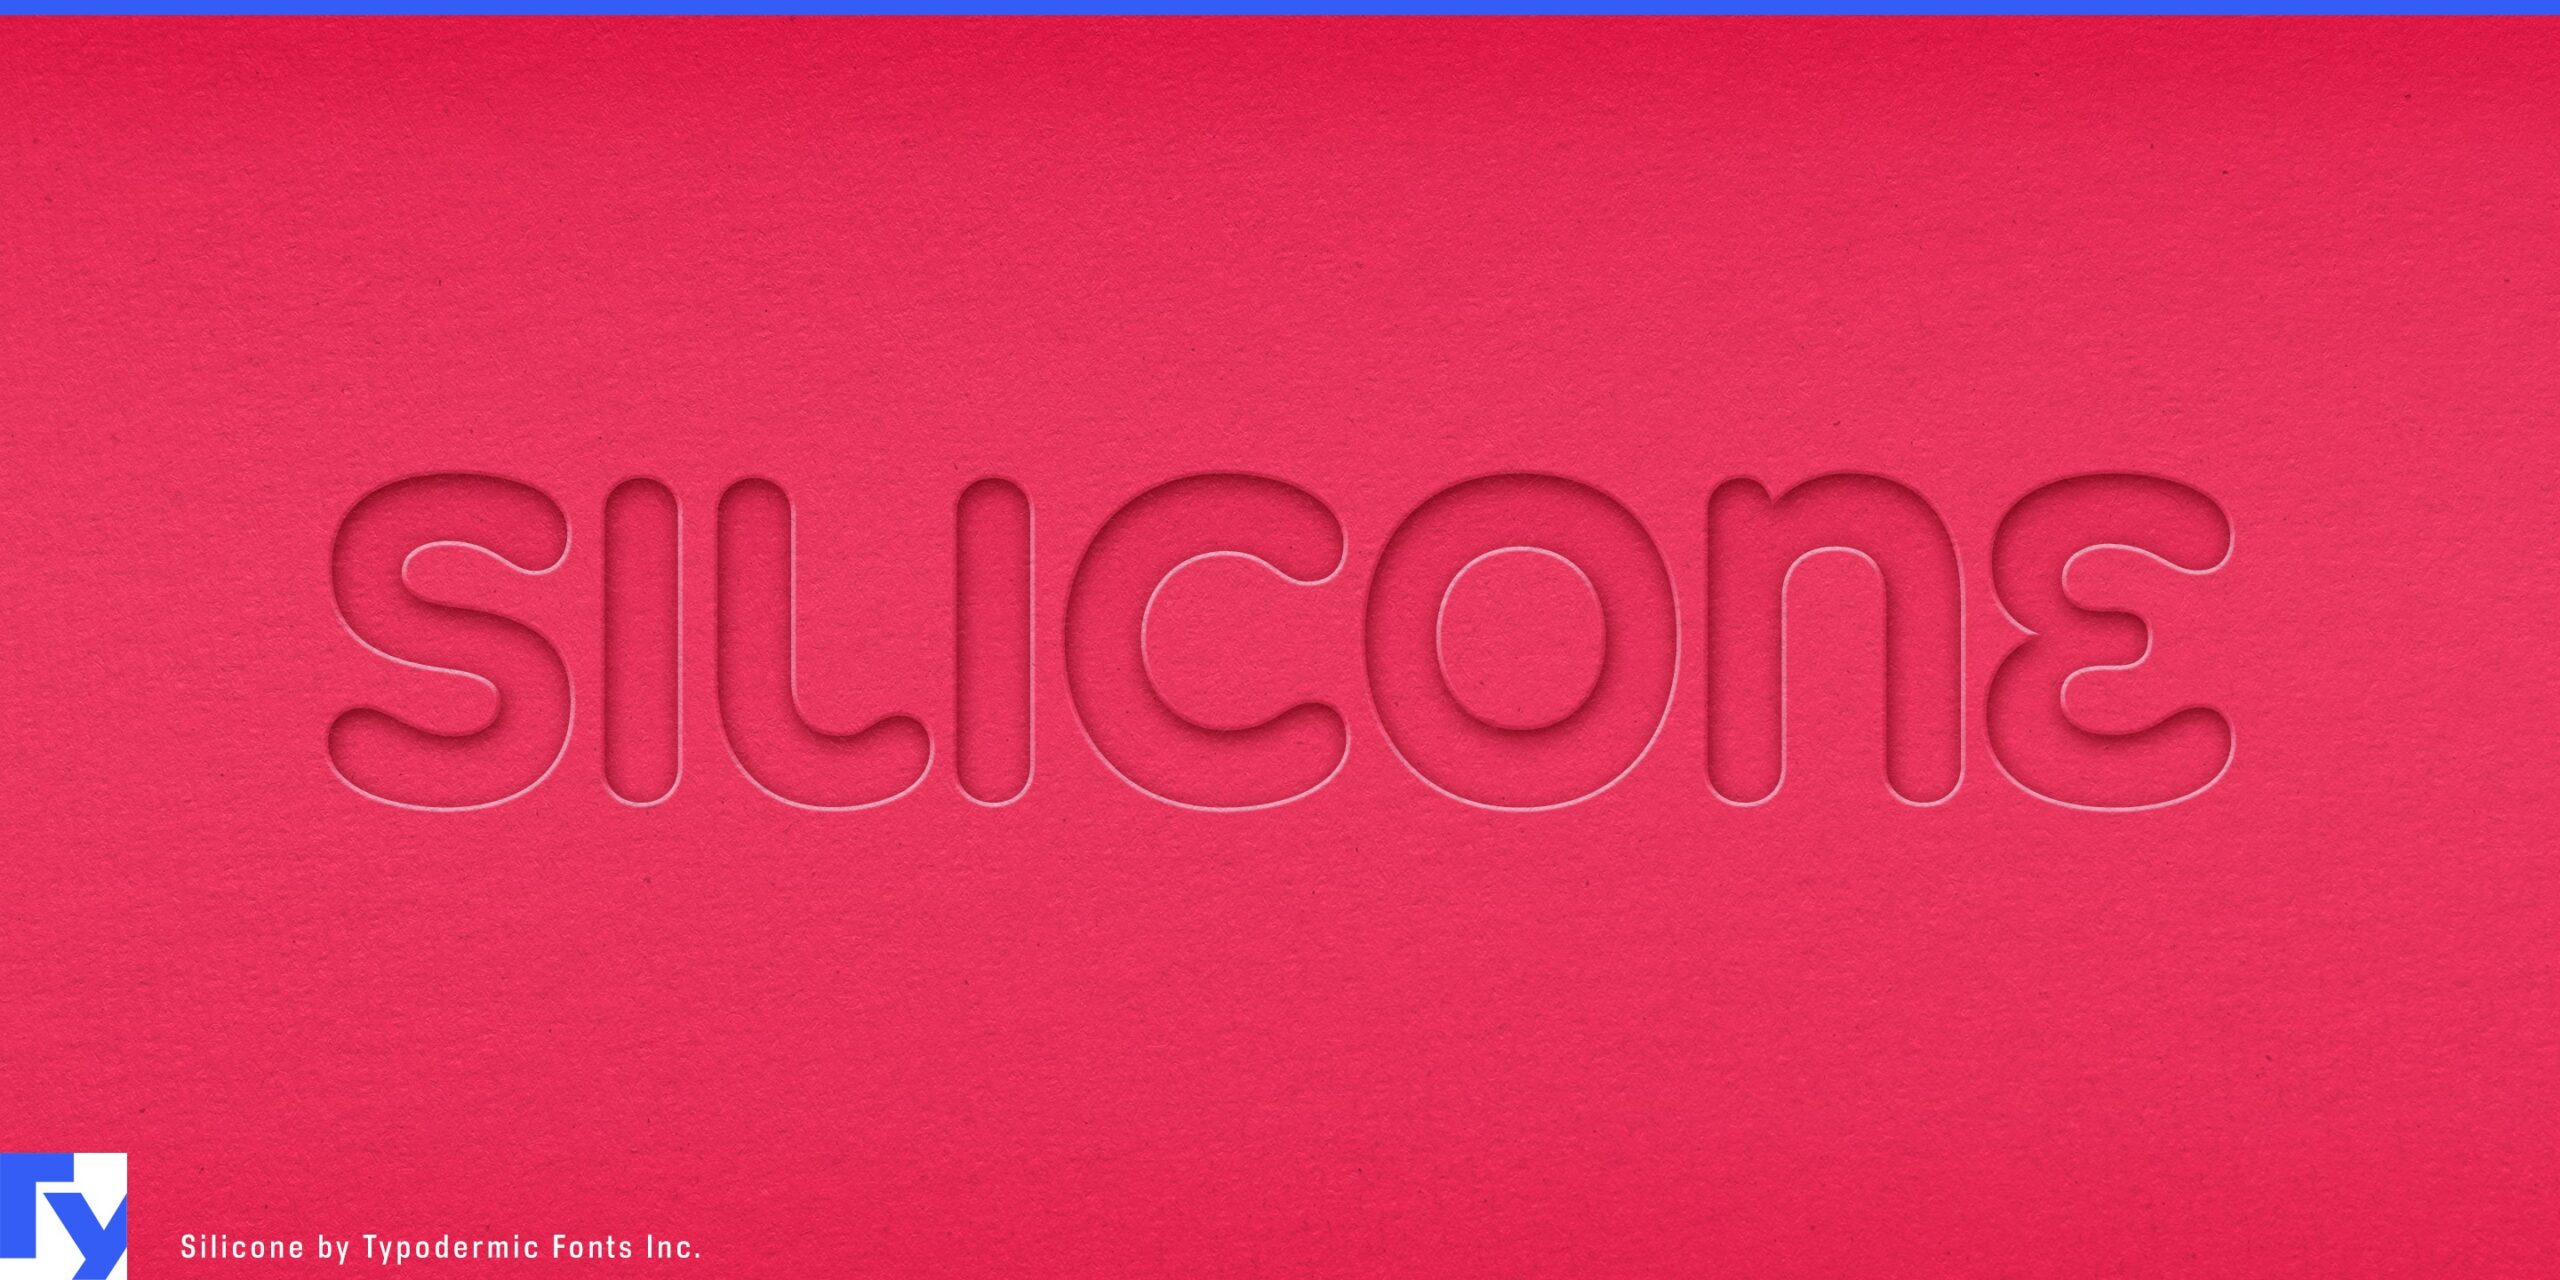 Infuse your designs with the futuristic essence of the Silicone font.